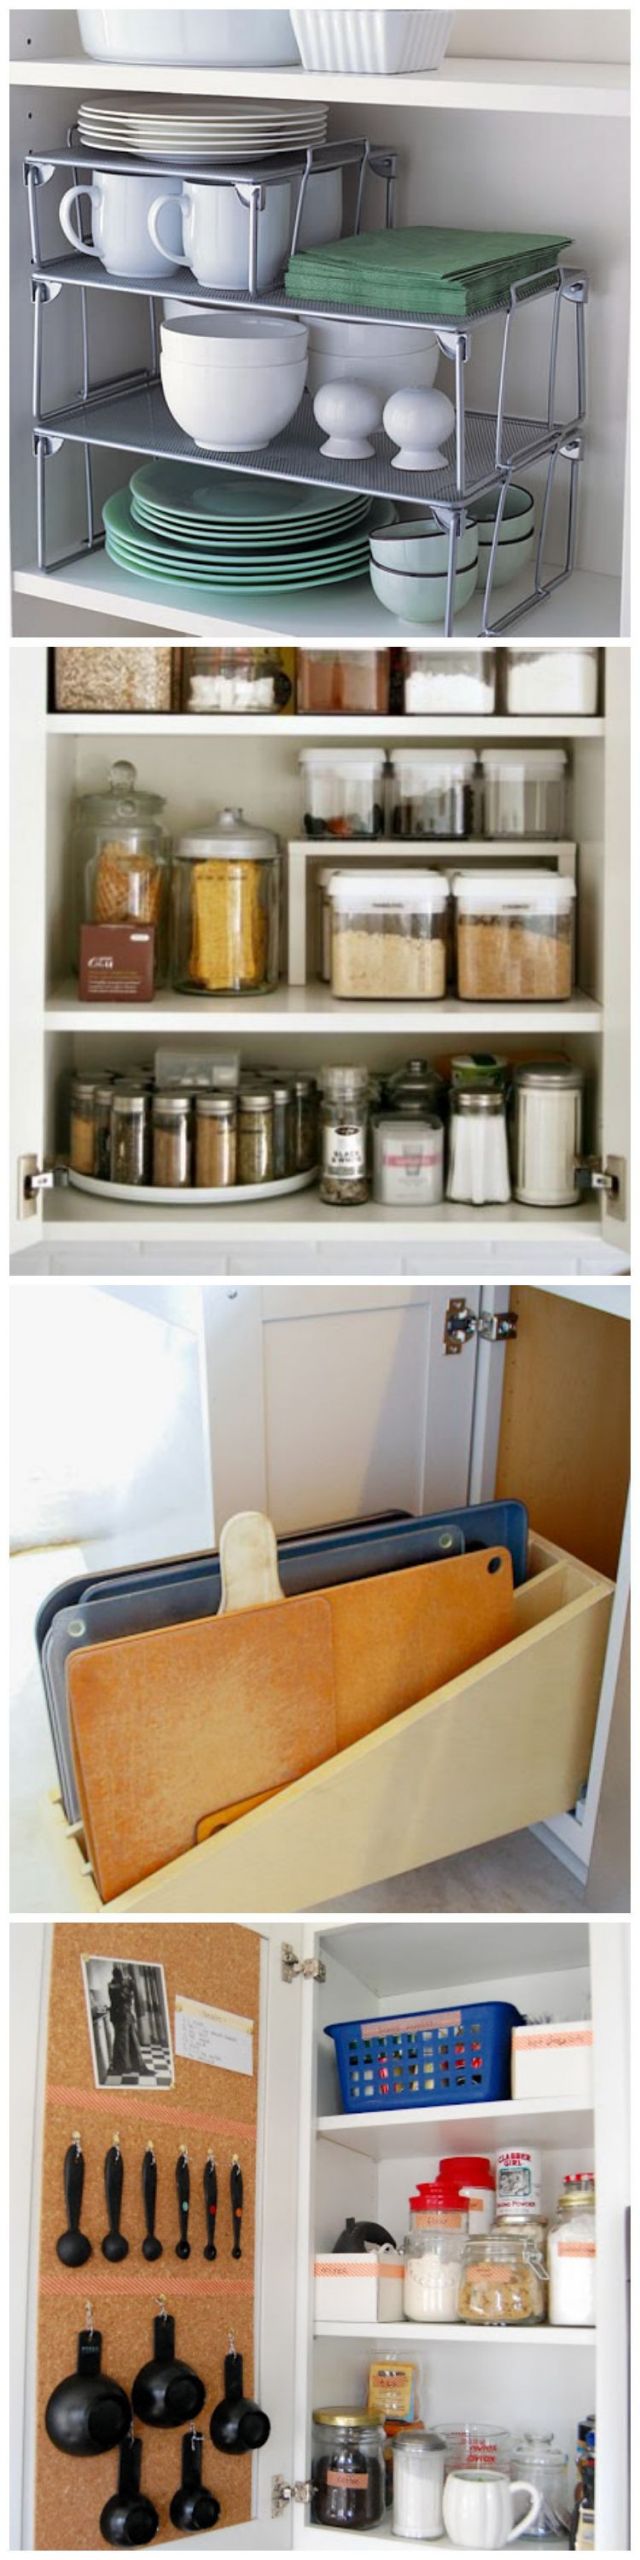 Small Kitchen Cabinet Organization
 These Insanely Organized Cabinets Will Inspire Your Next